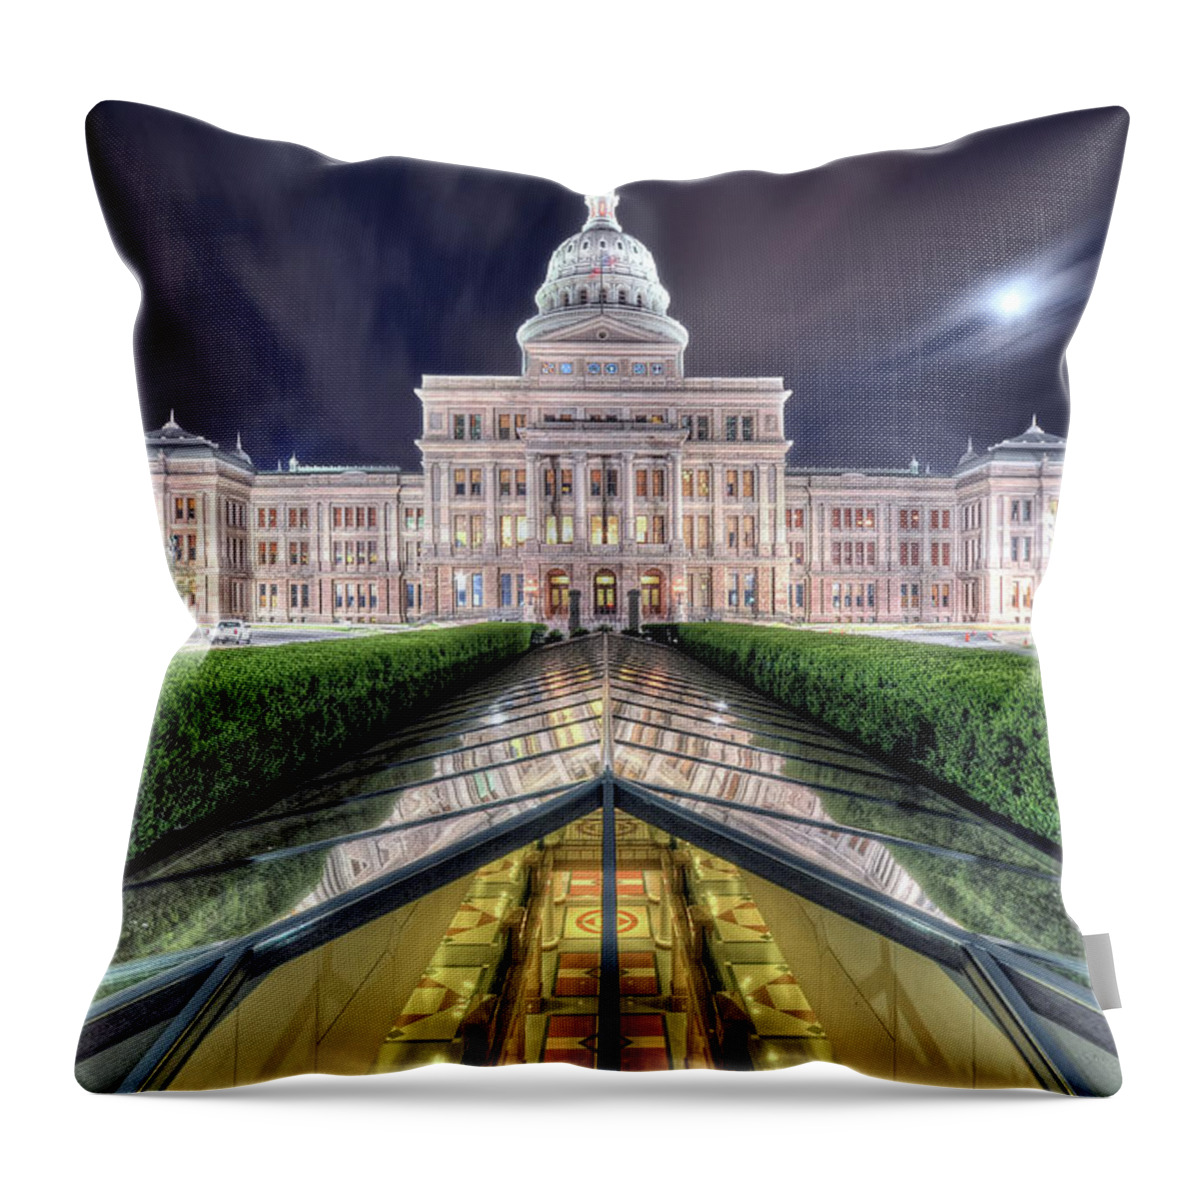 Outdoors Throw Pillow featuring the photograph Texas Capitol In Early Morning by Evan Gearing Photography